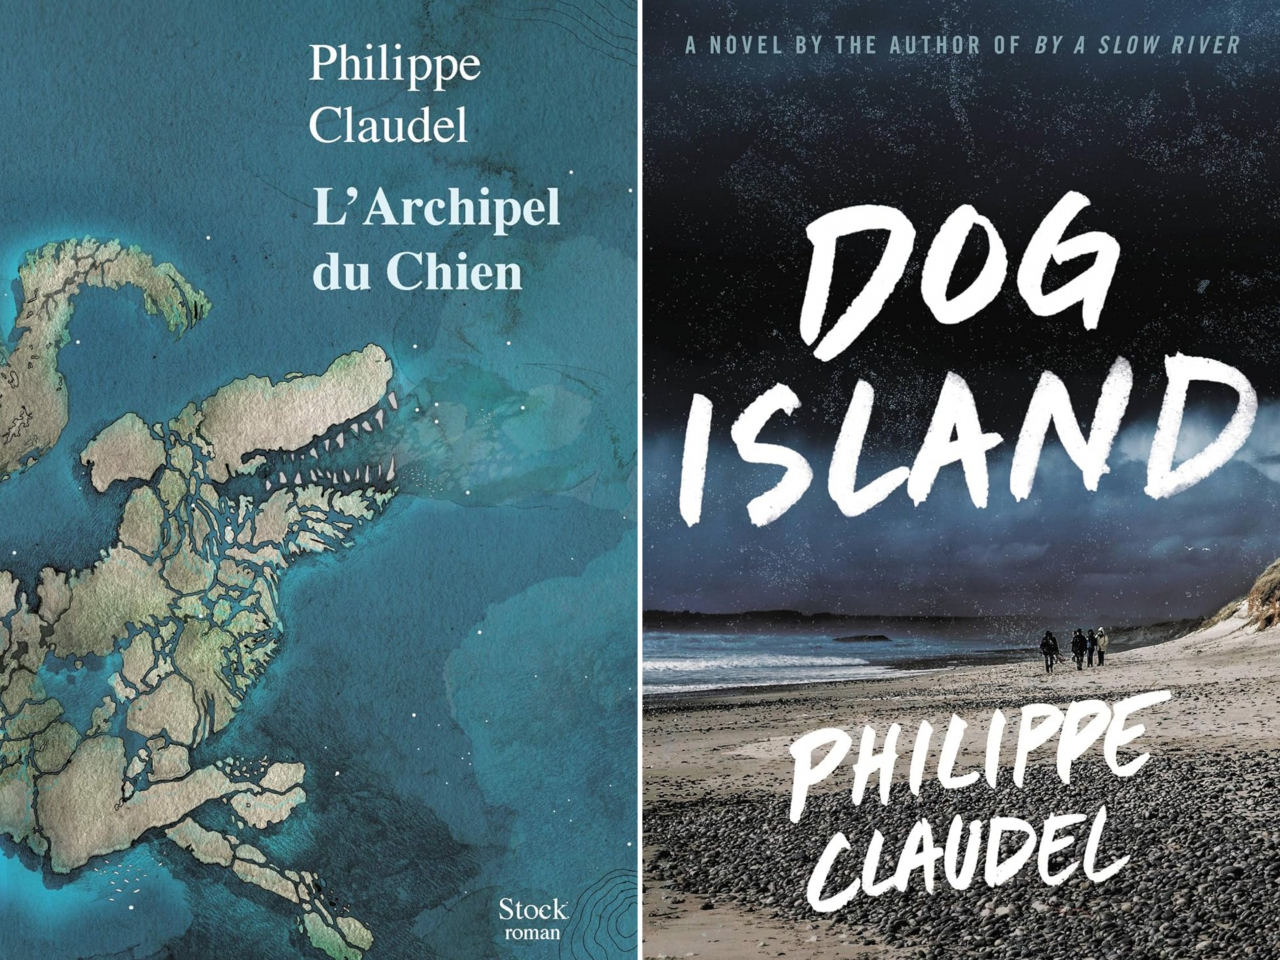 French edition (left) and English edition of 